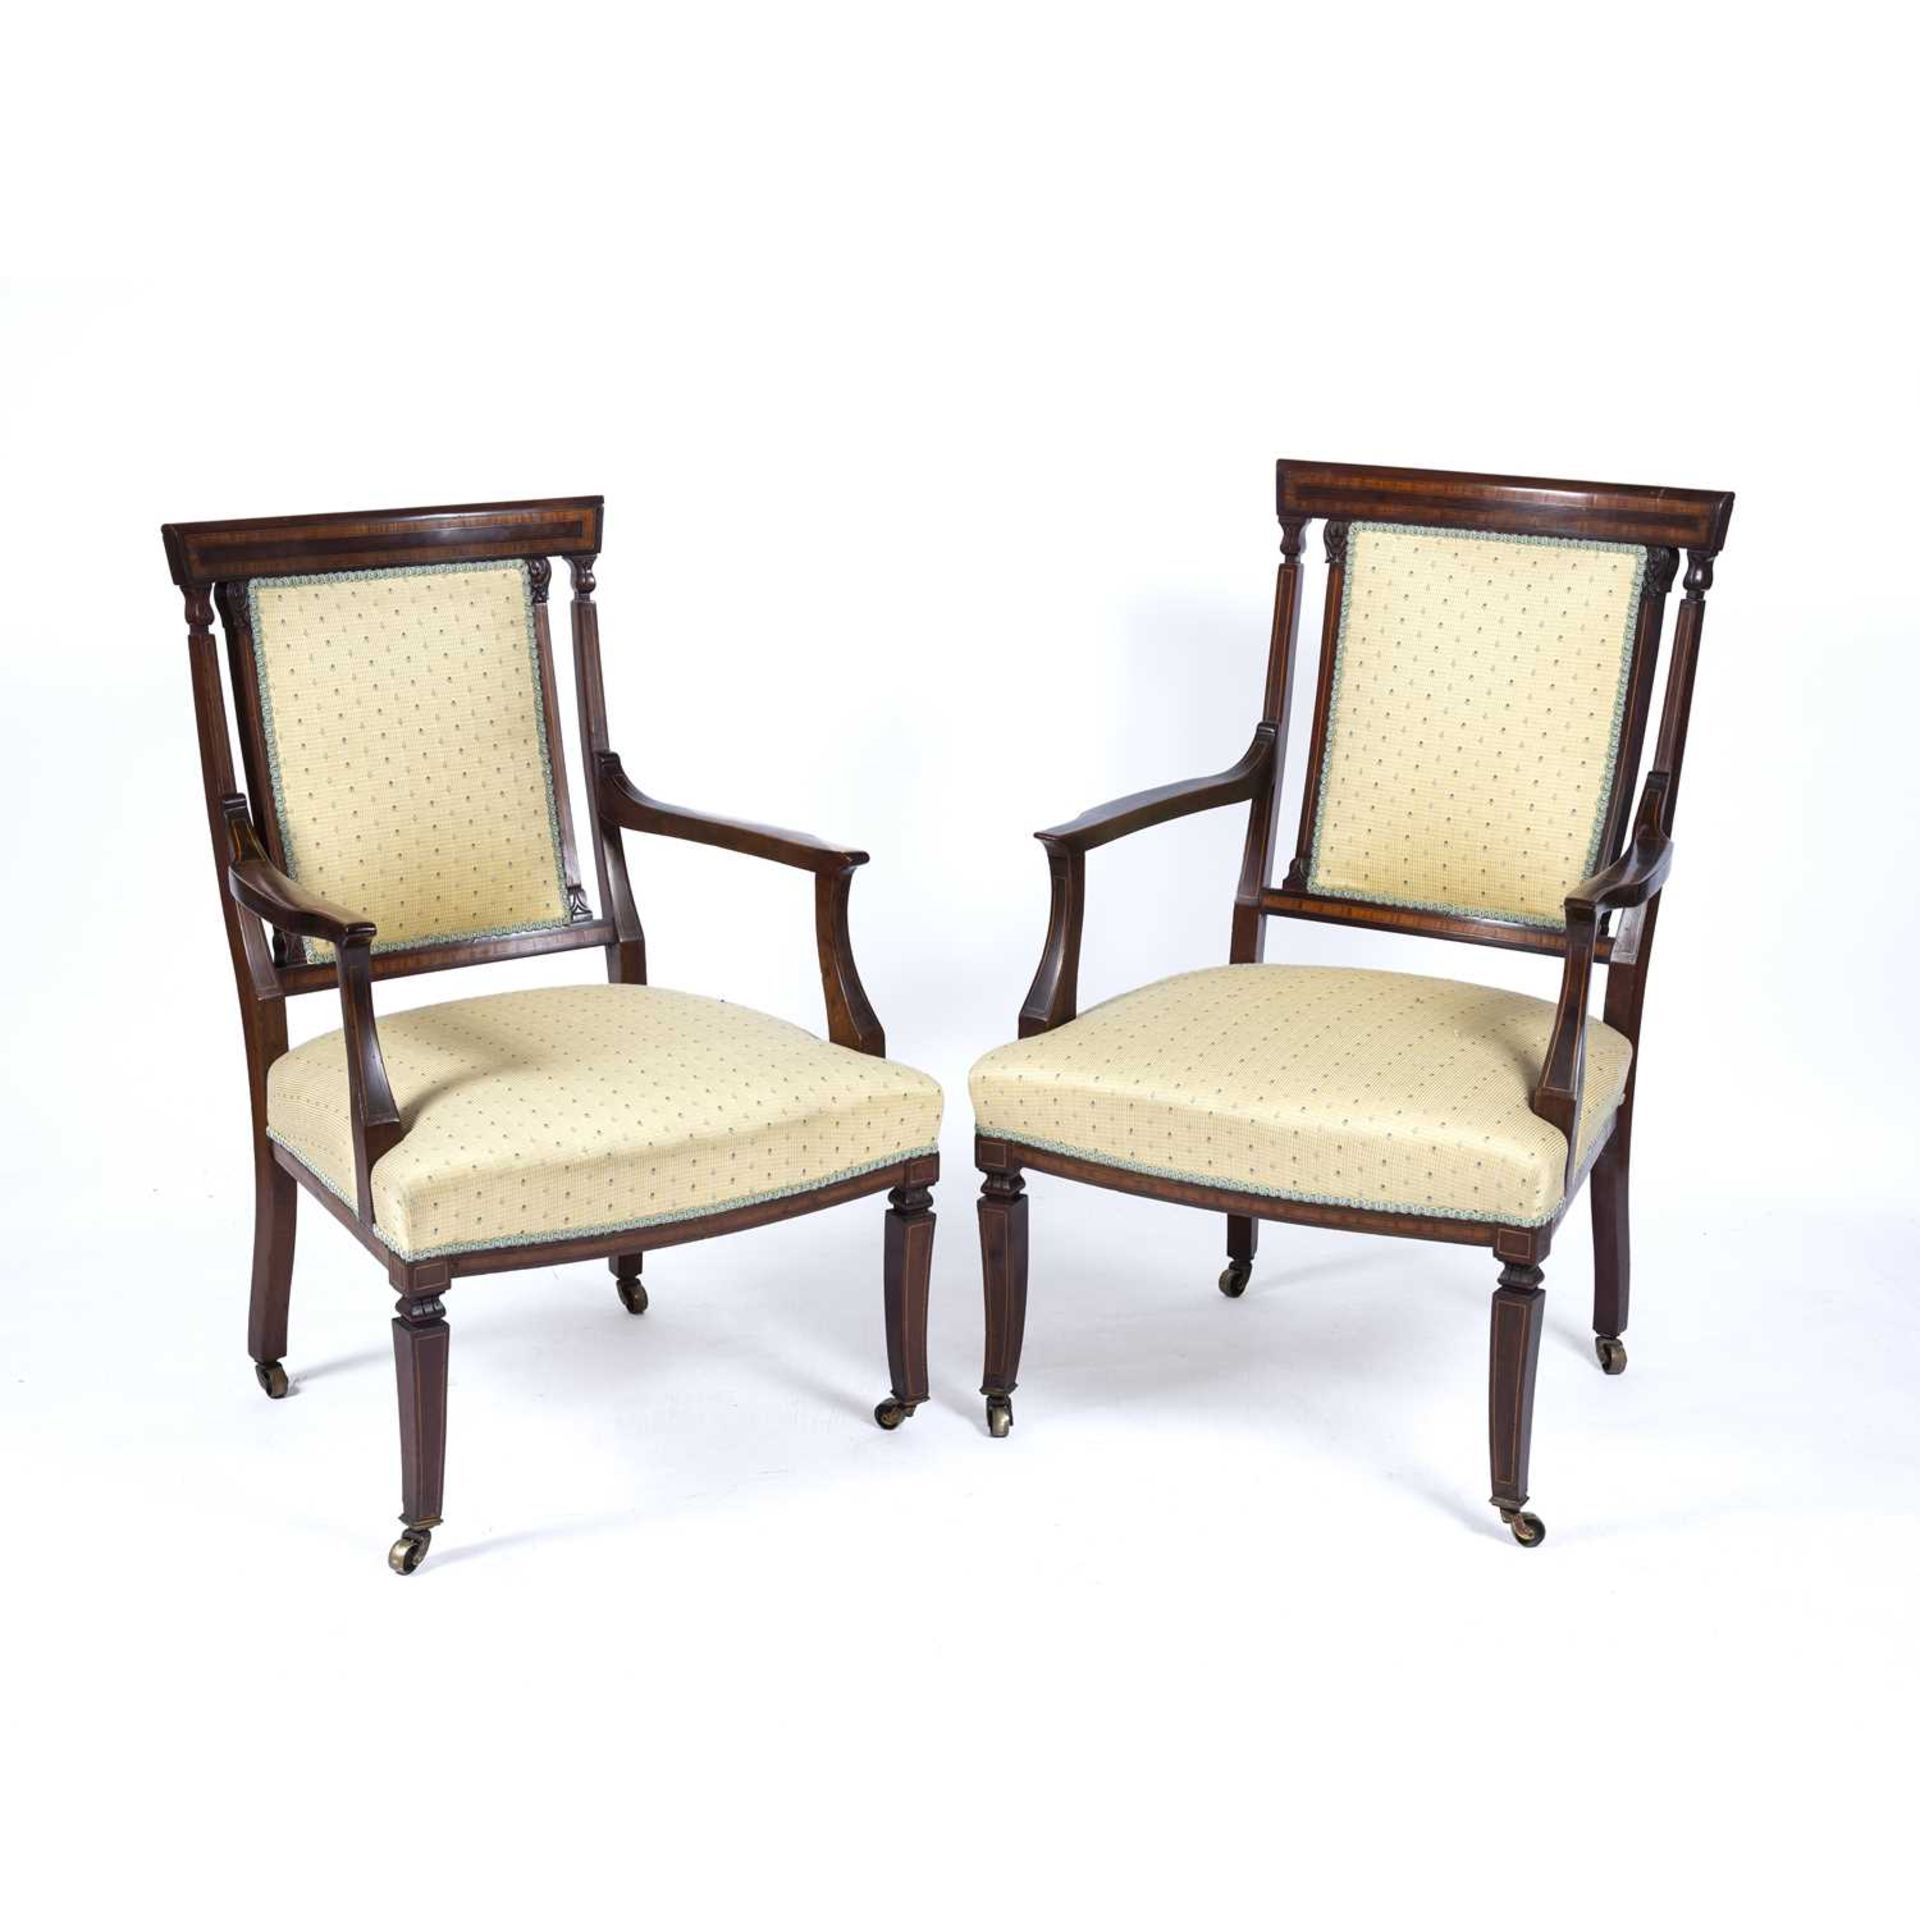 Pair of yellow upholstered armchairs Edwardian, with mahogany and satinwood frames, on brass